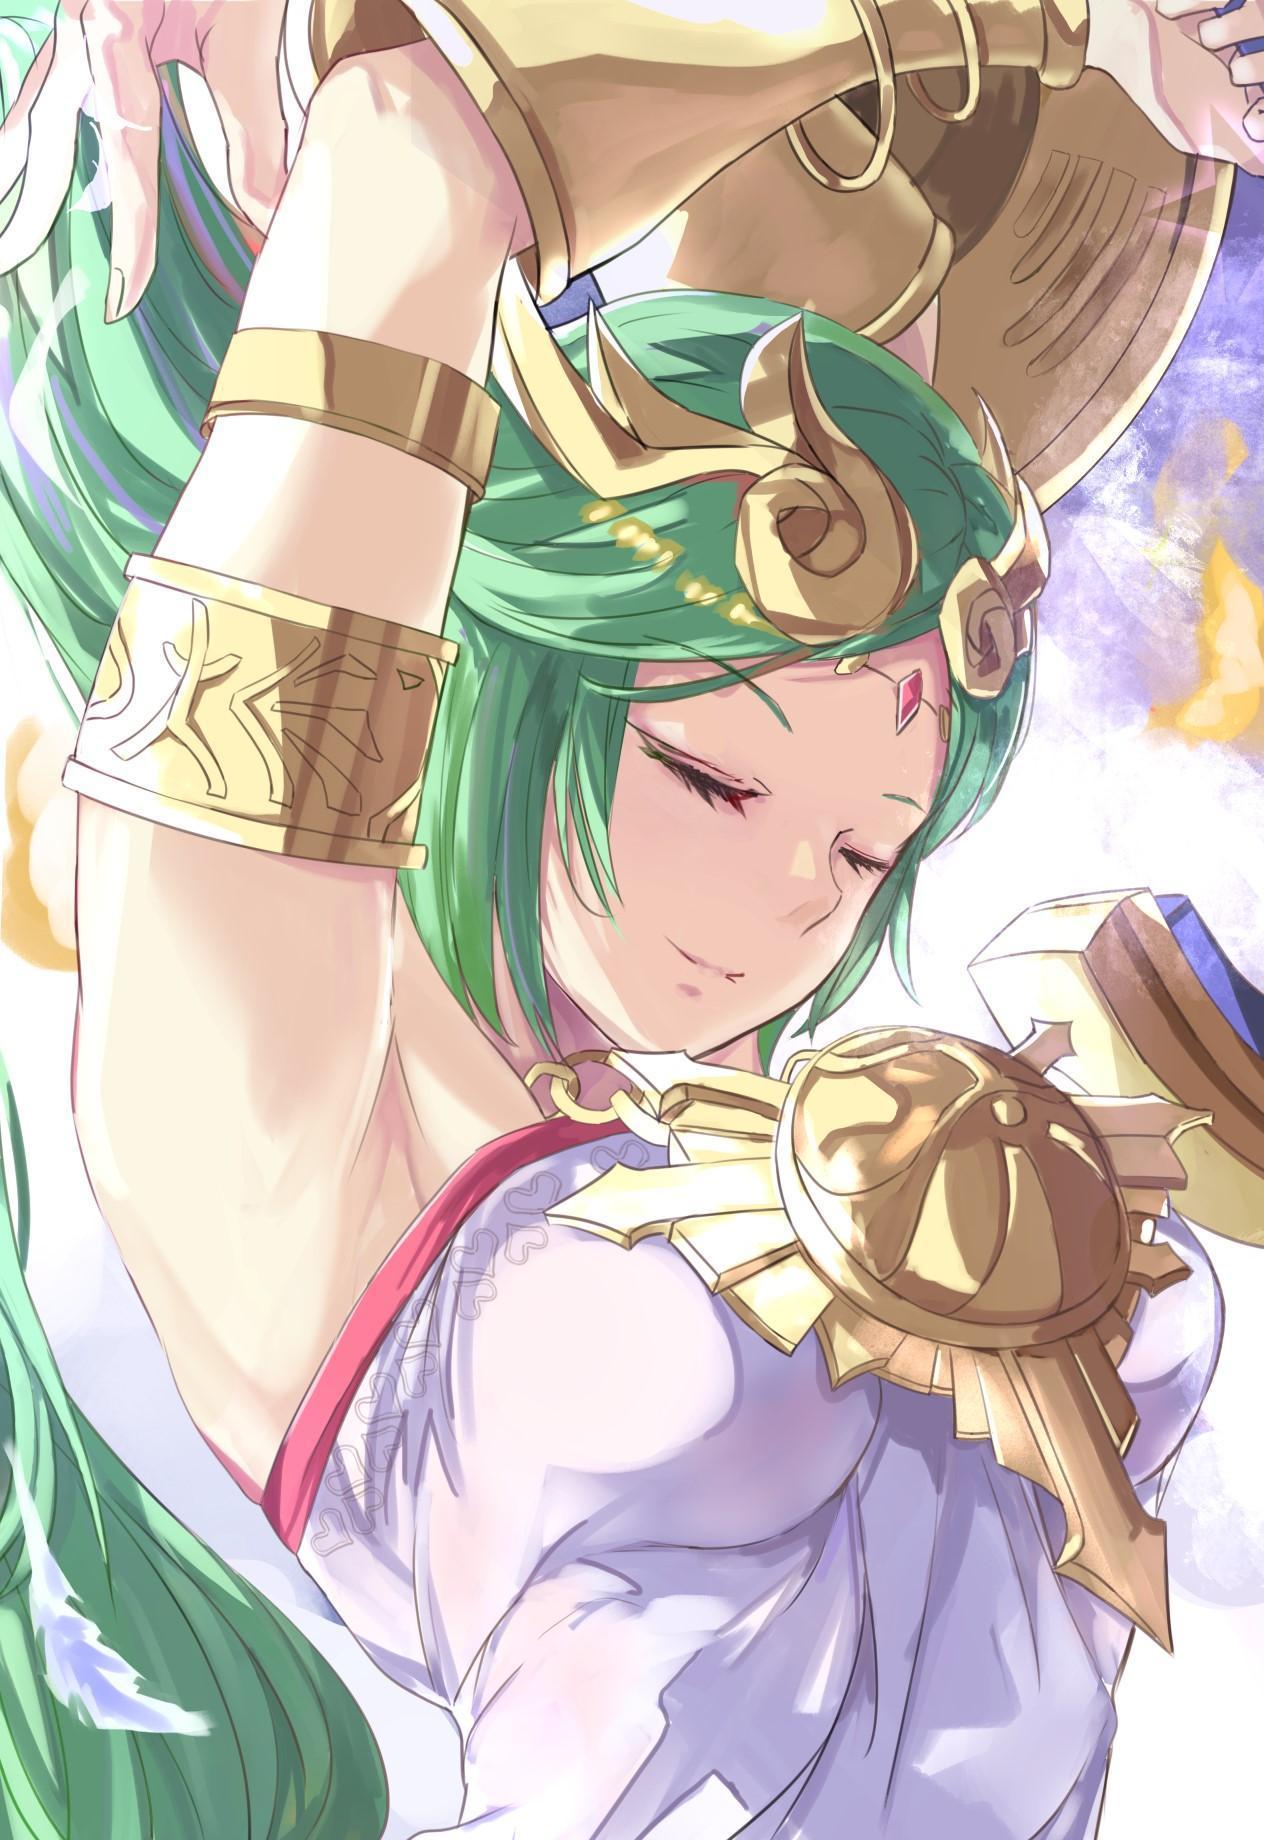 HD wallpaper, Palutena, Super Smash Brothers, Long Hair, 2D, Digital Art, Anime, Arms Up, Green Hair, Video Game Characters, Vertical, Artwork, Anime Girls, Portrait Display